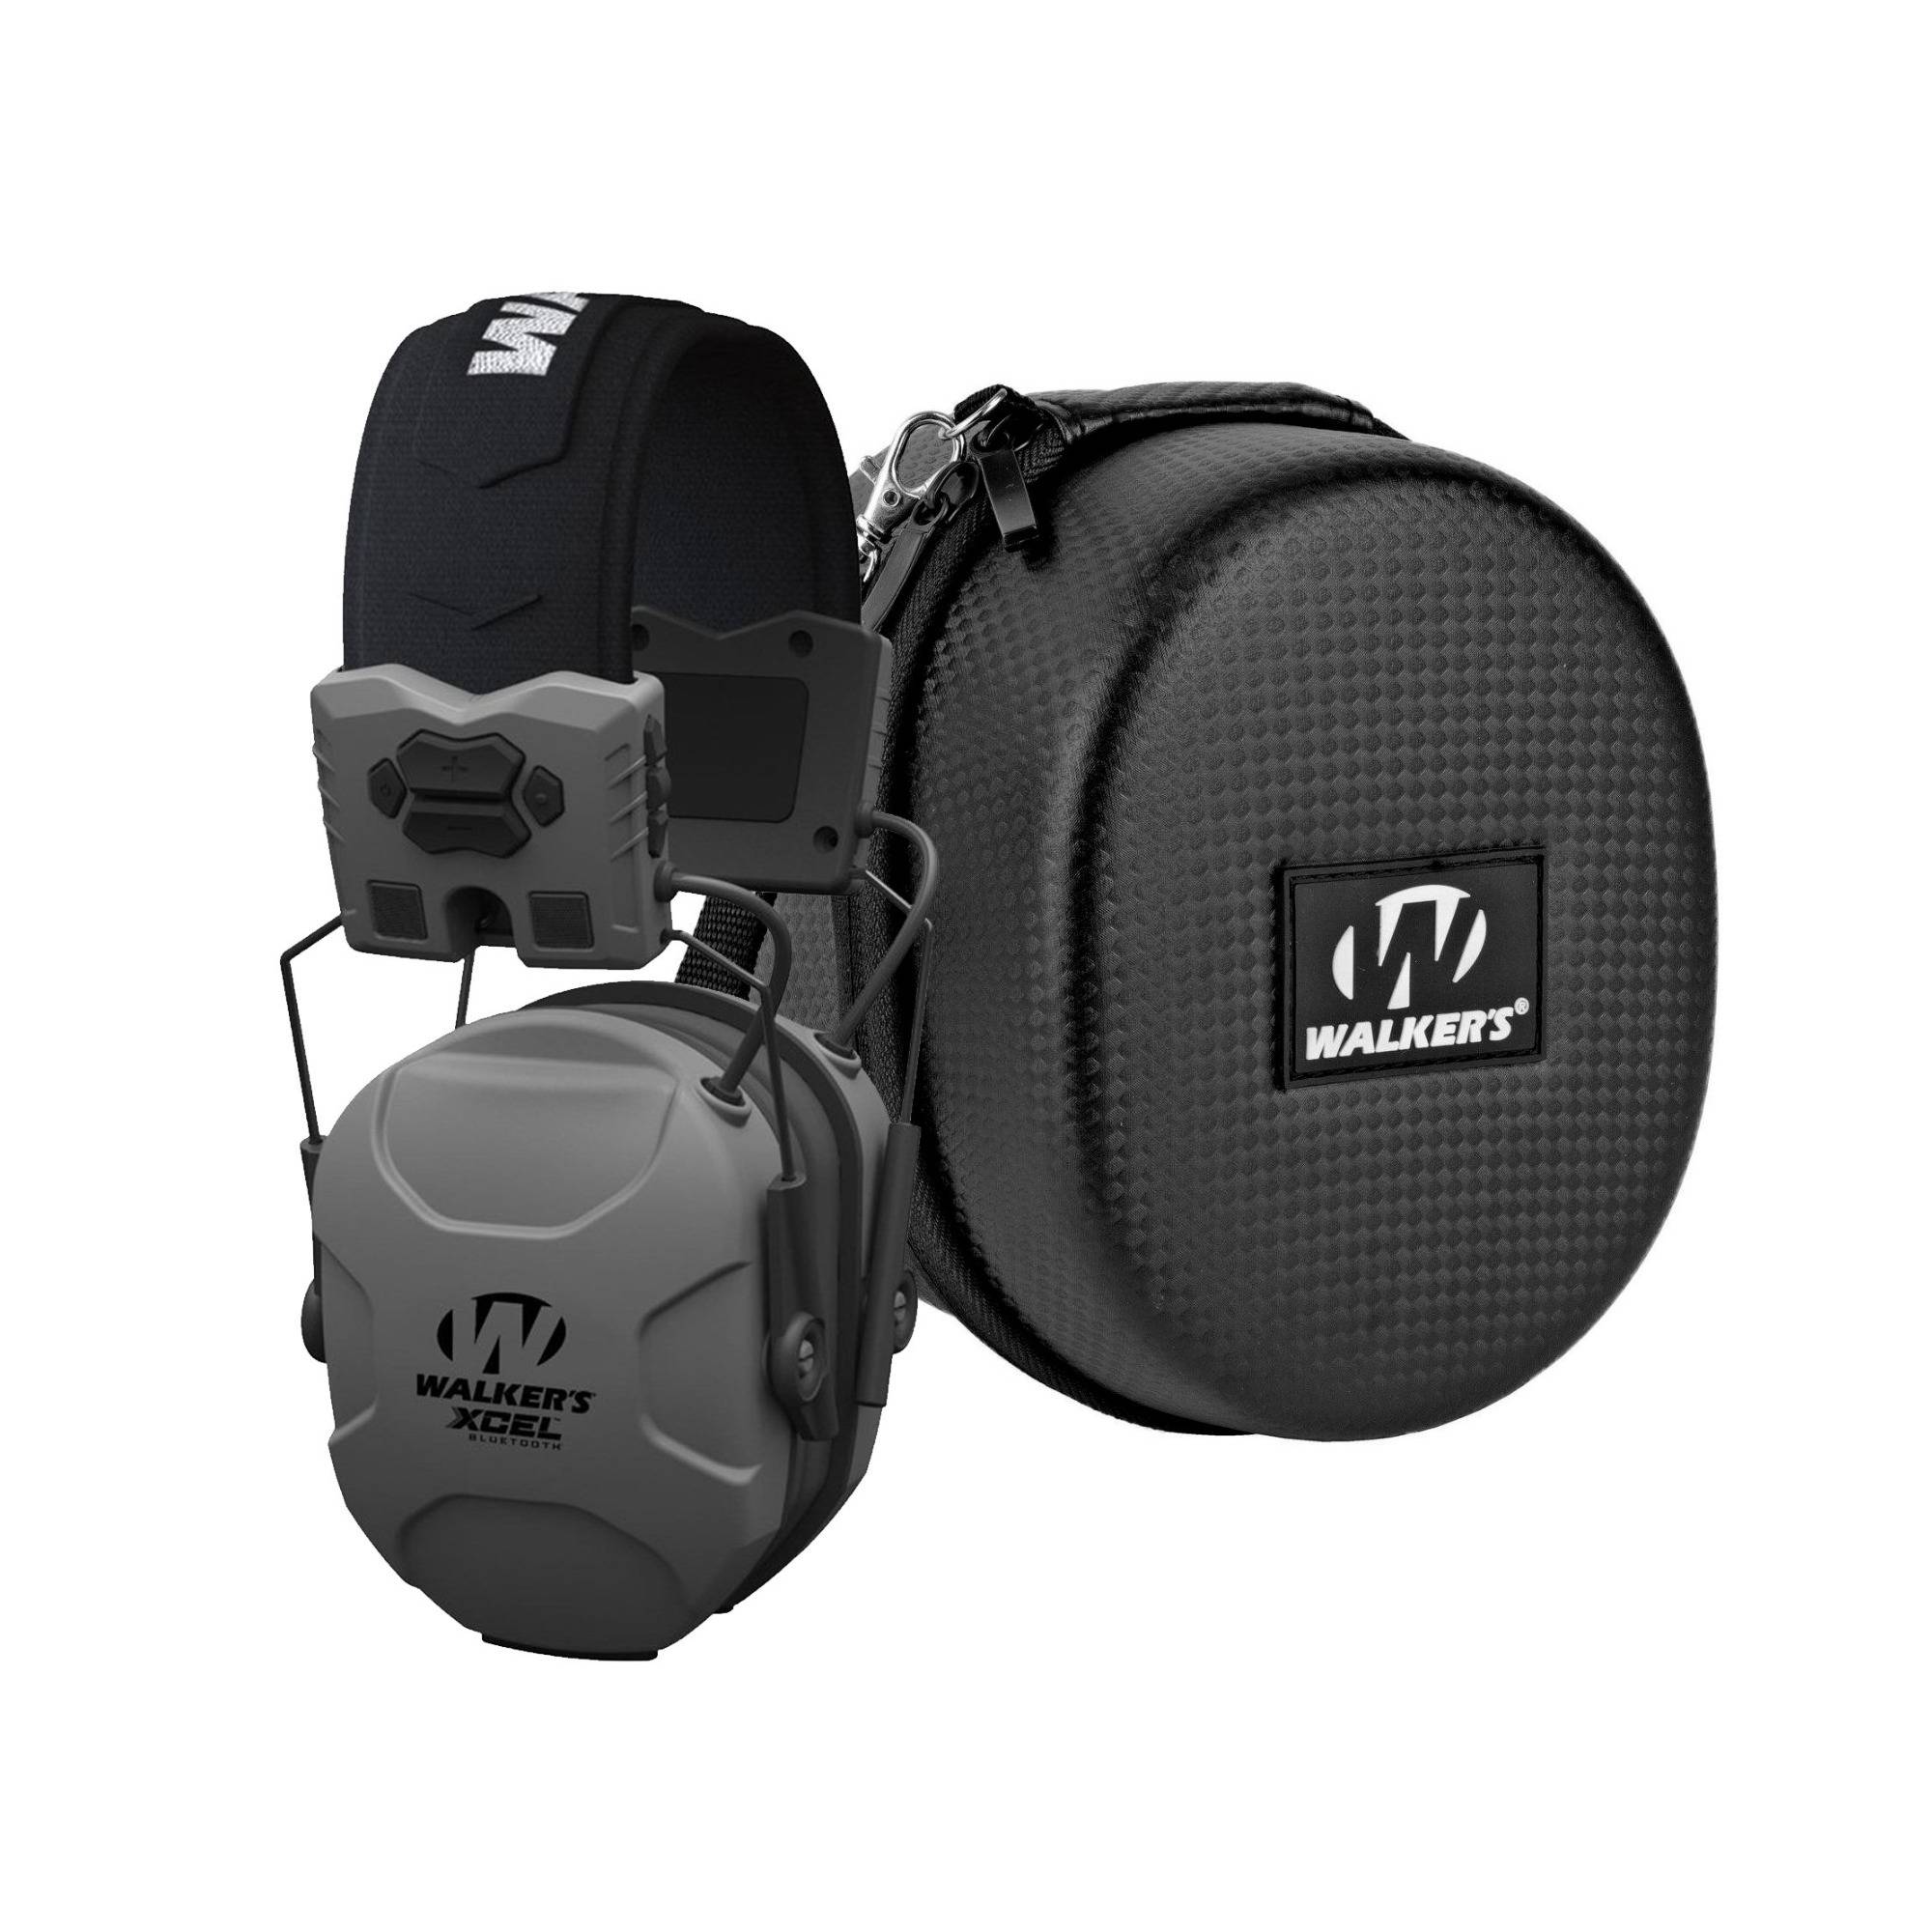 Walker's XCEL 500BT Digital Electronic Muff with Voice Clarity and Bluetooth with Case Bundle